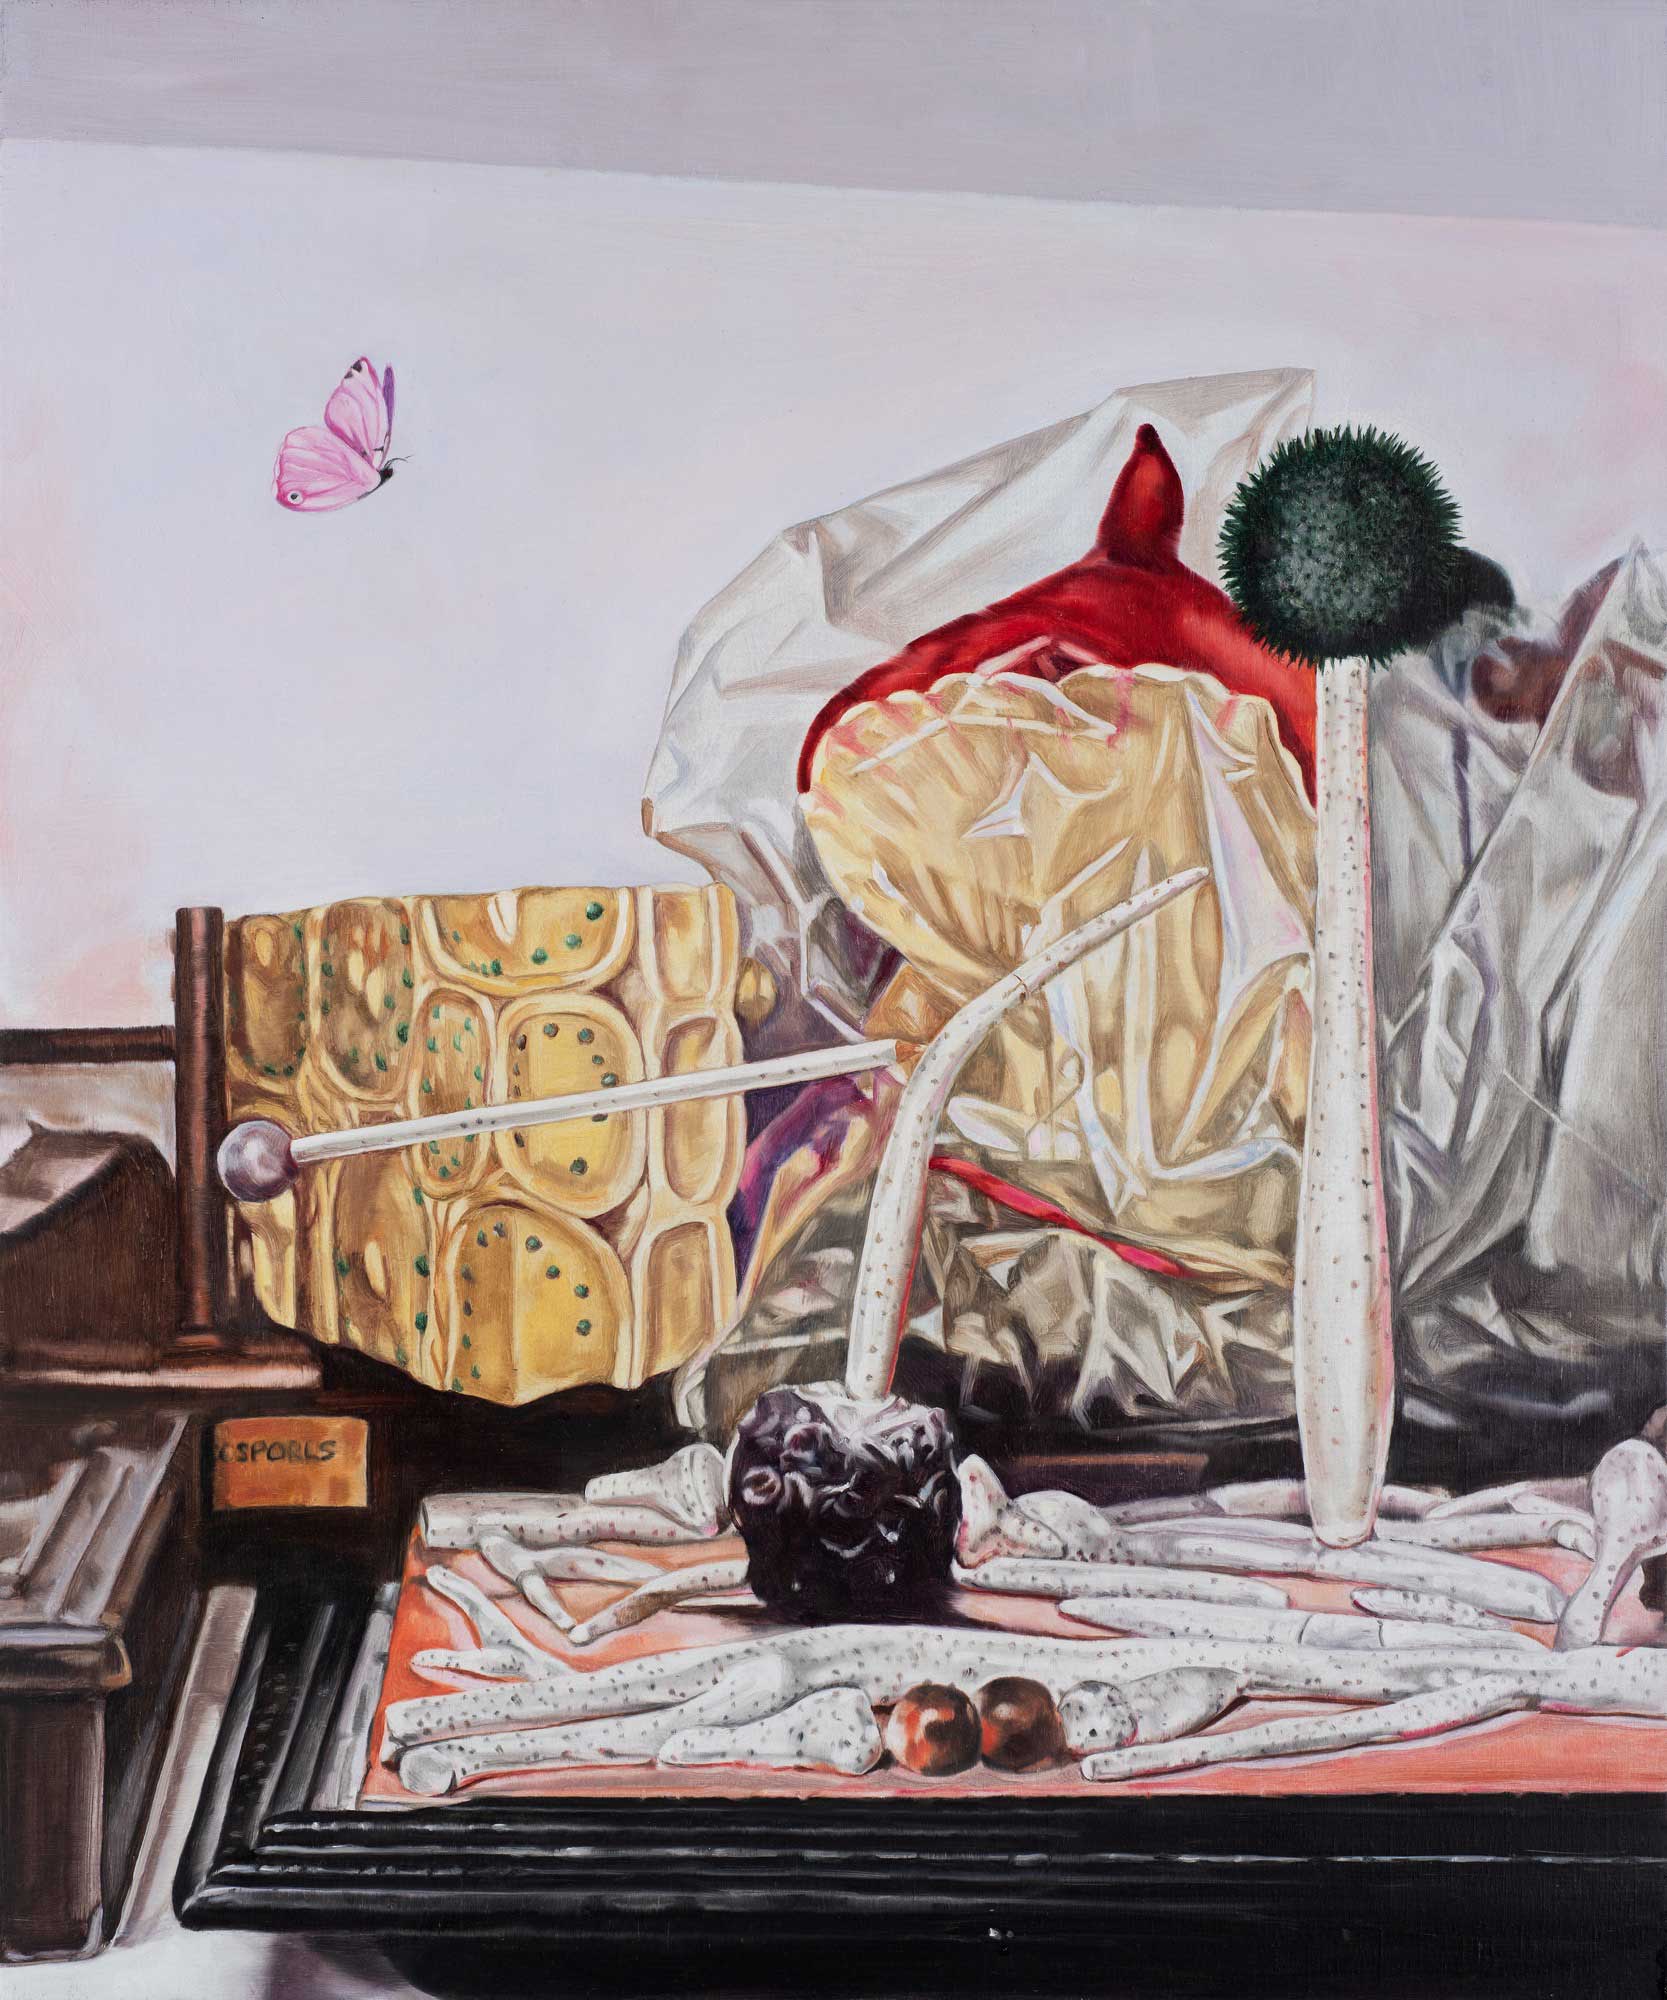   Still life with fungi and butterfly,  2019 66 x 56cm oil on linen 